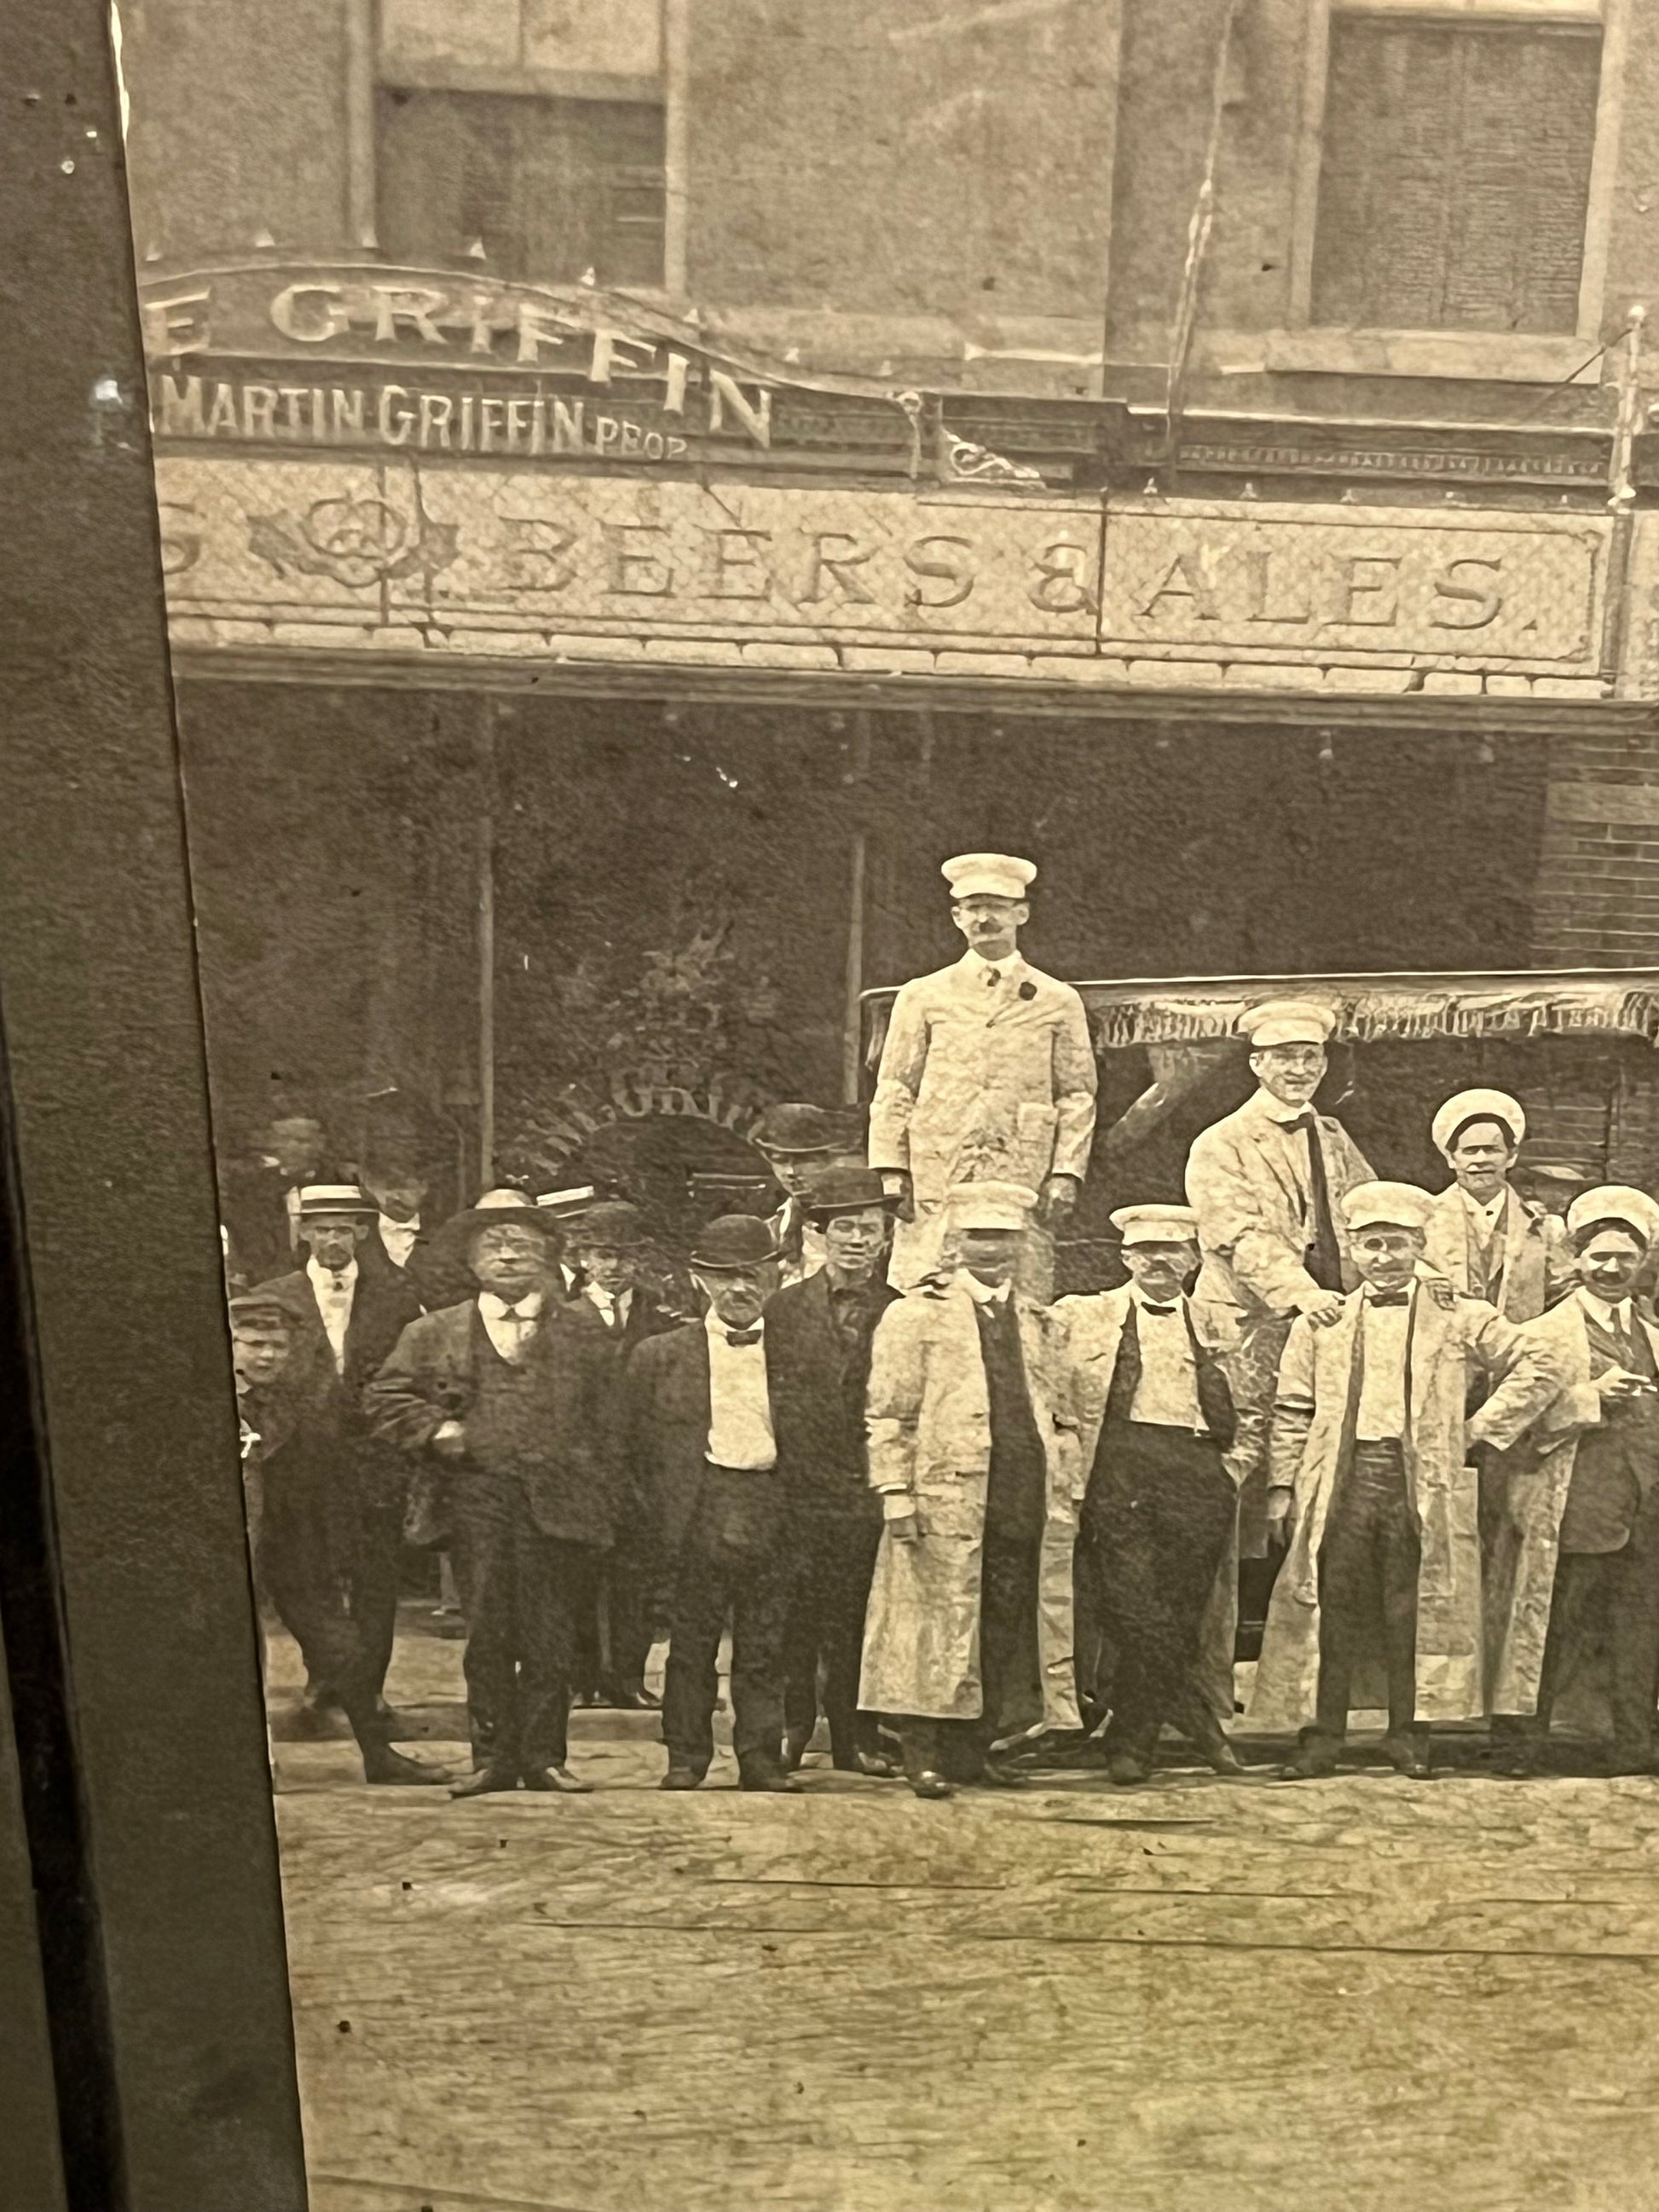 Antique photo occupational brewery Martin griffin beers & ale workers outside building 1910s